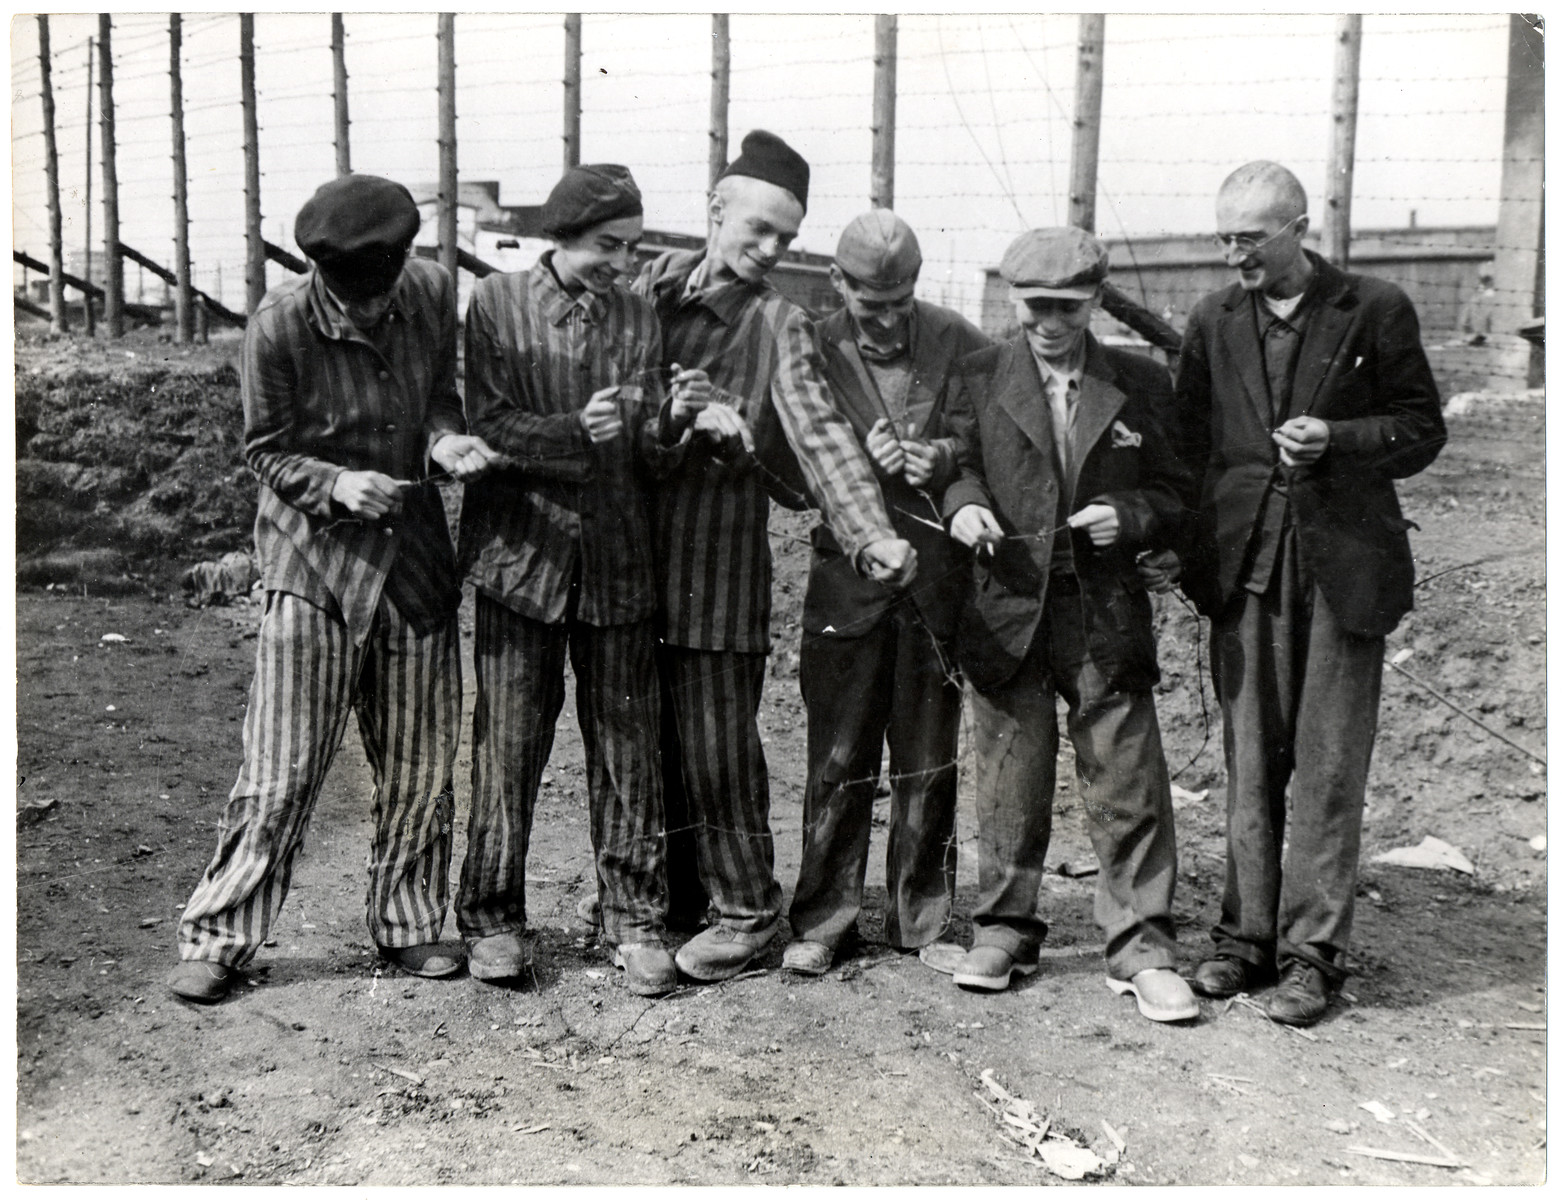 Survivors of the Hanover concentration camp destroy the barbed wire that had held them captive.

Original caption reads; "Former Jewish and Polish prisoners of the Nazis laugh at the barbed wire which for years held them captive at the Nazi Hanover-Harlen concentration camp near Hanover, Germany, captured by troops of the Ninth U.S. Army April 10, 1945. Hanover is 155 miles from Berlin."